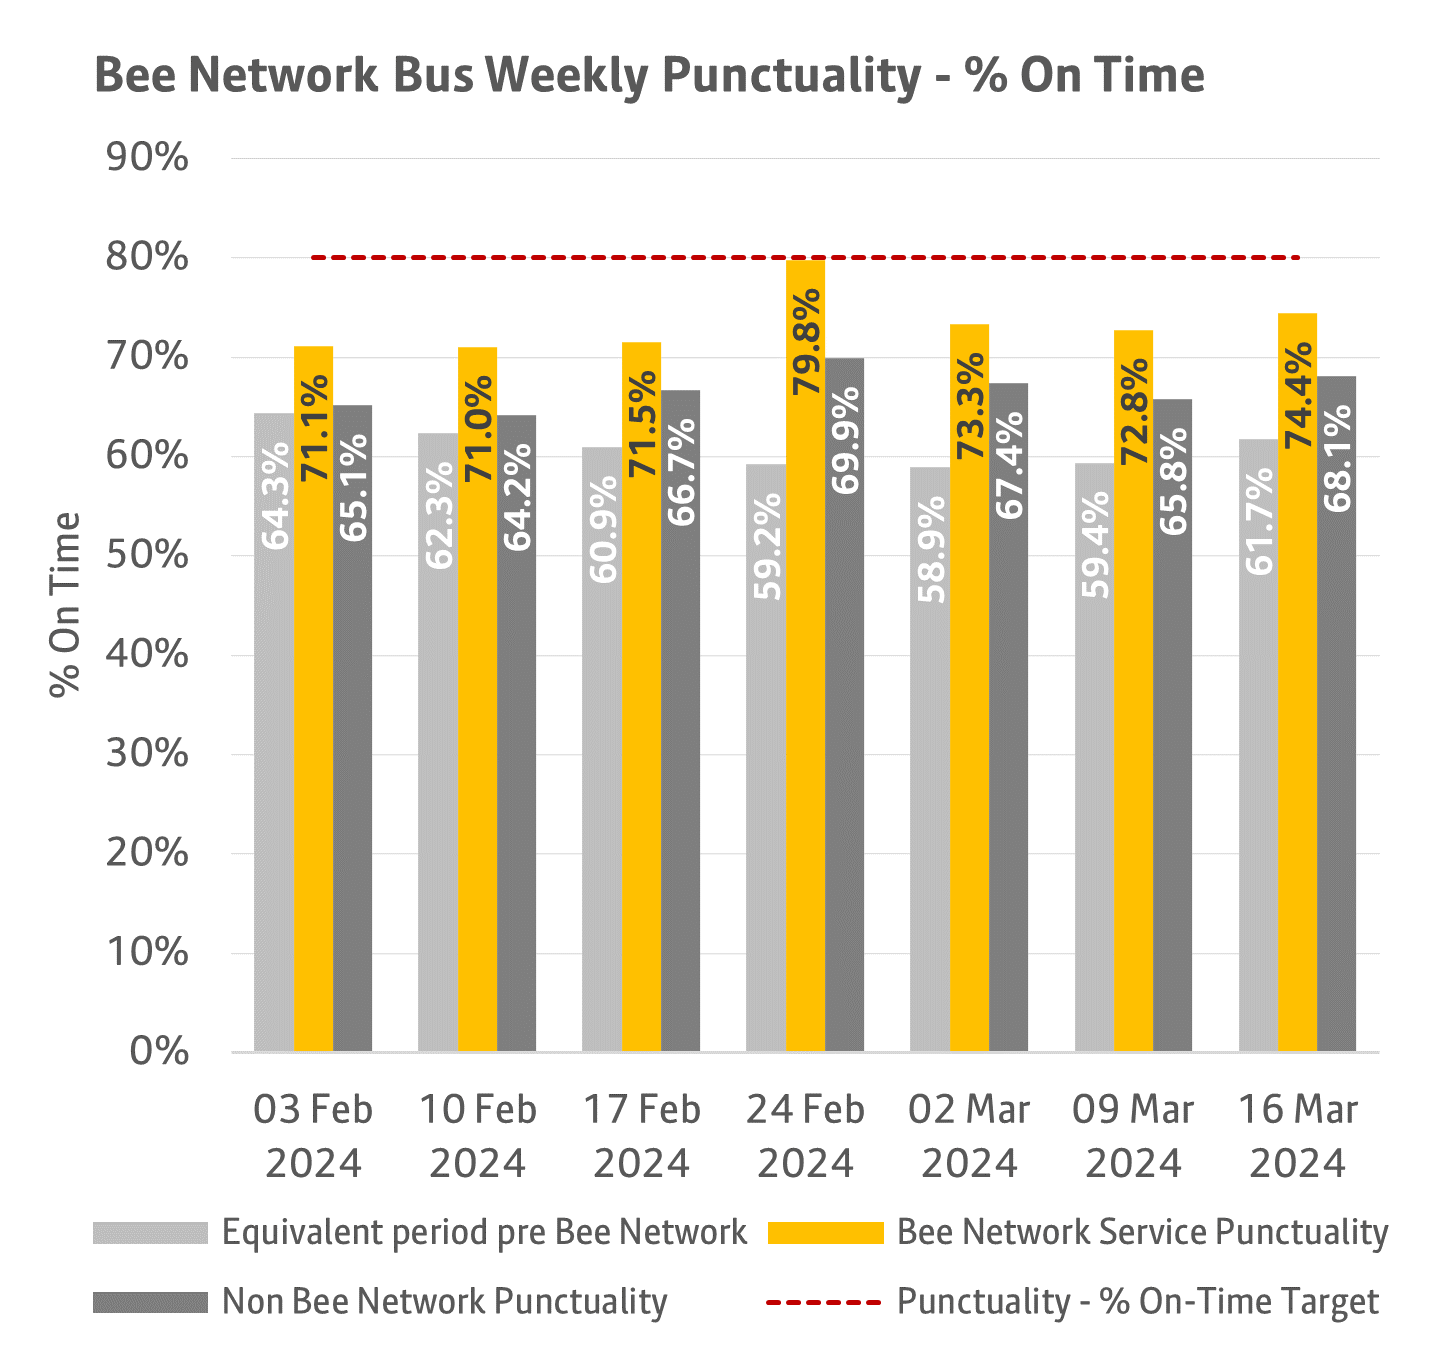 The chart shows weekly punctuality data for Bee Network services and non-Bee Network services over a six week period ending 16 March 2024. More information above